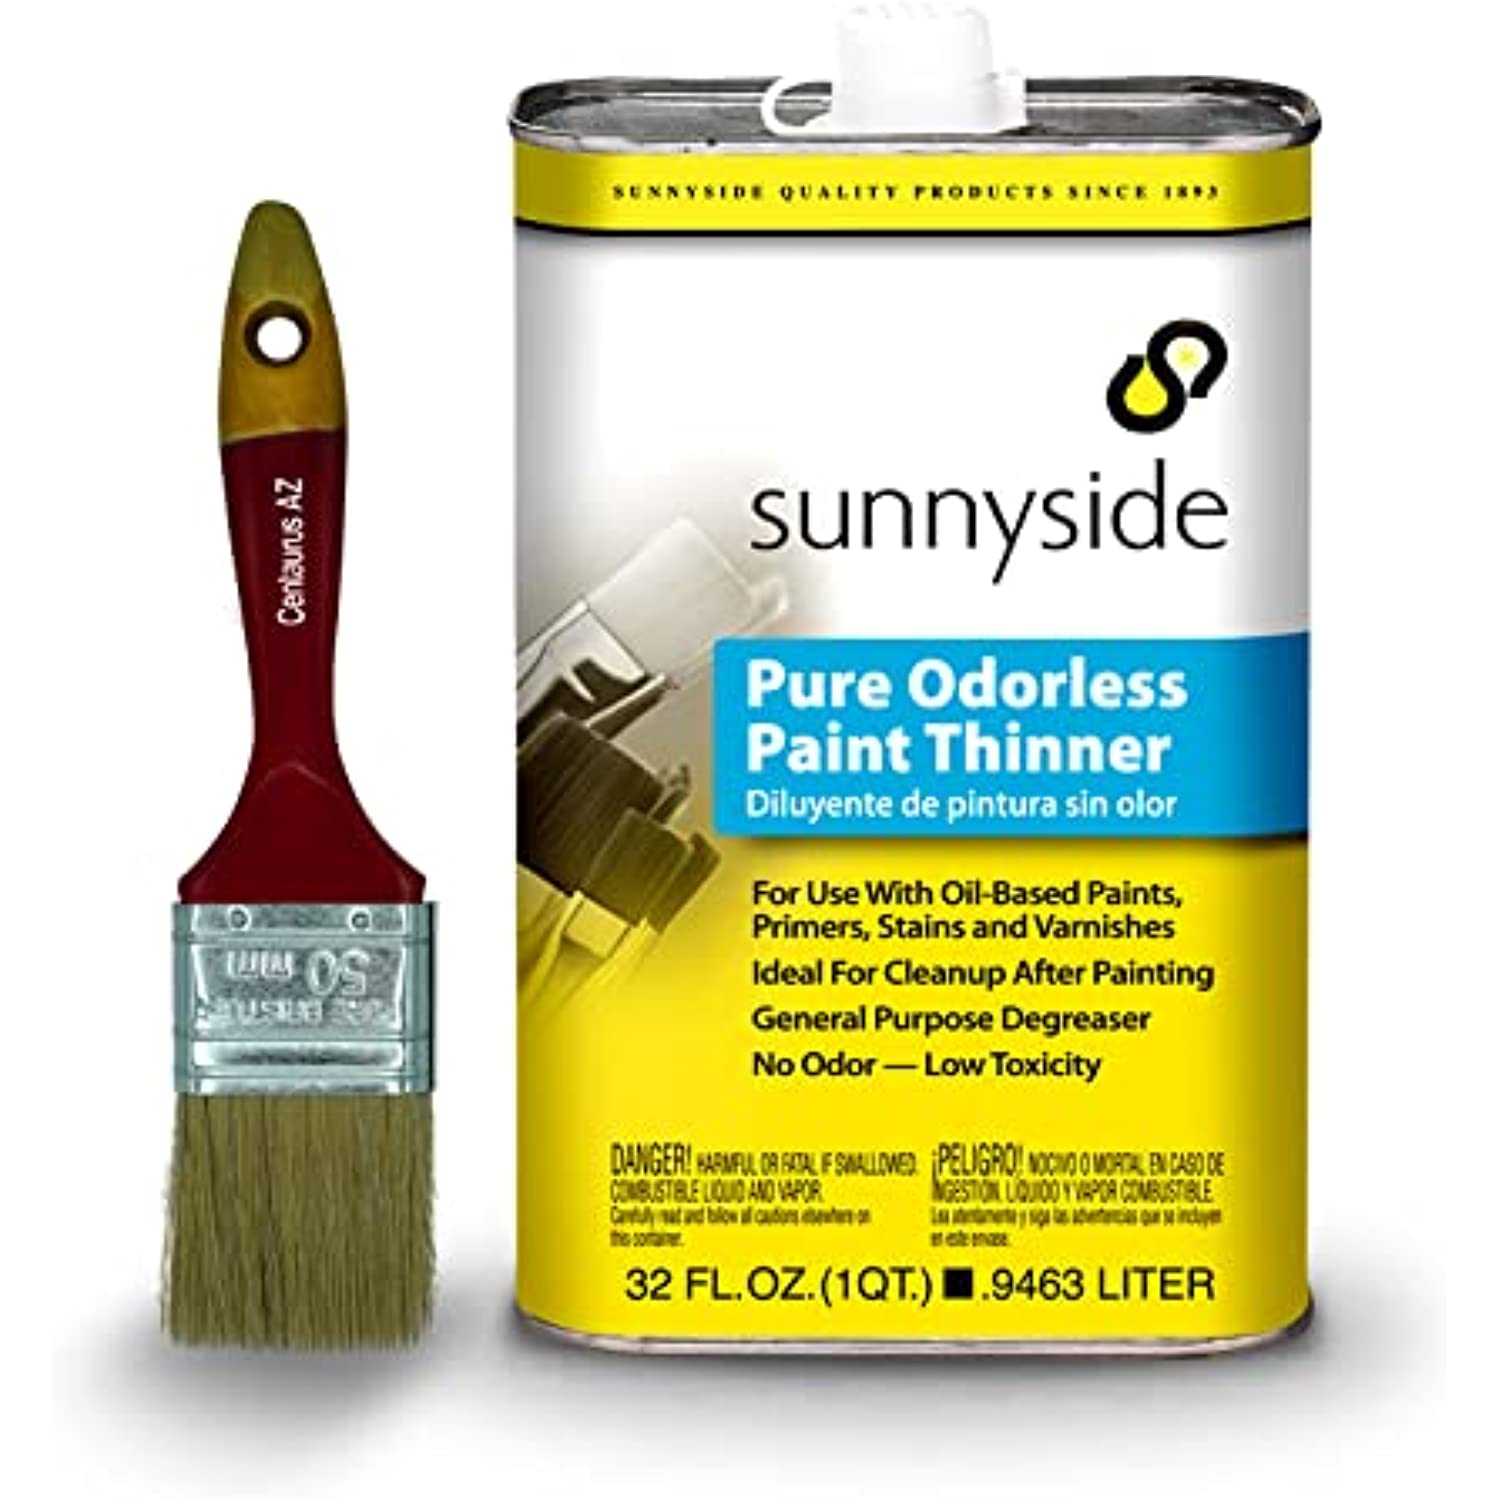 Sunnyside Pure Odorless Paint Thinner 1 Quart Odor-Free Quickly Thins Oil by Nature Non-Flammable with Low Toxicity Rate Available with Premium Quality Centaurus AZ Paint Brush